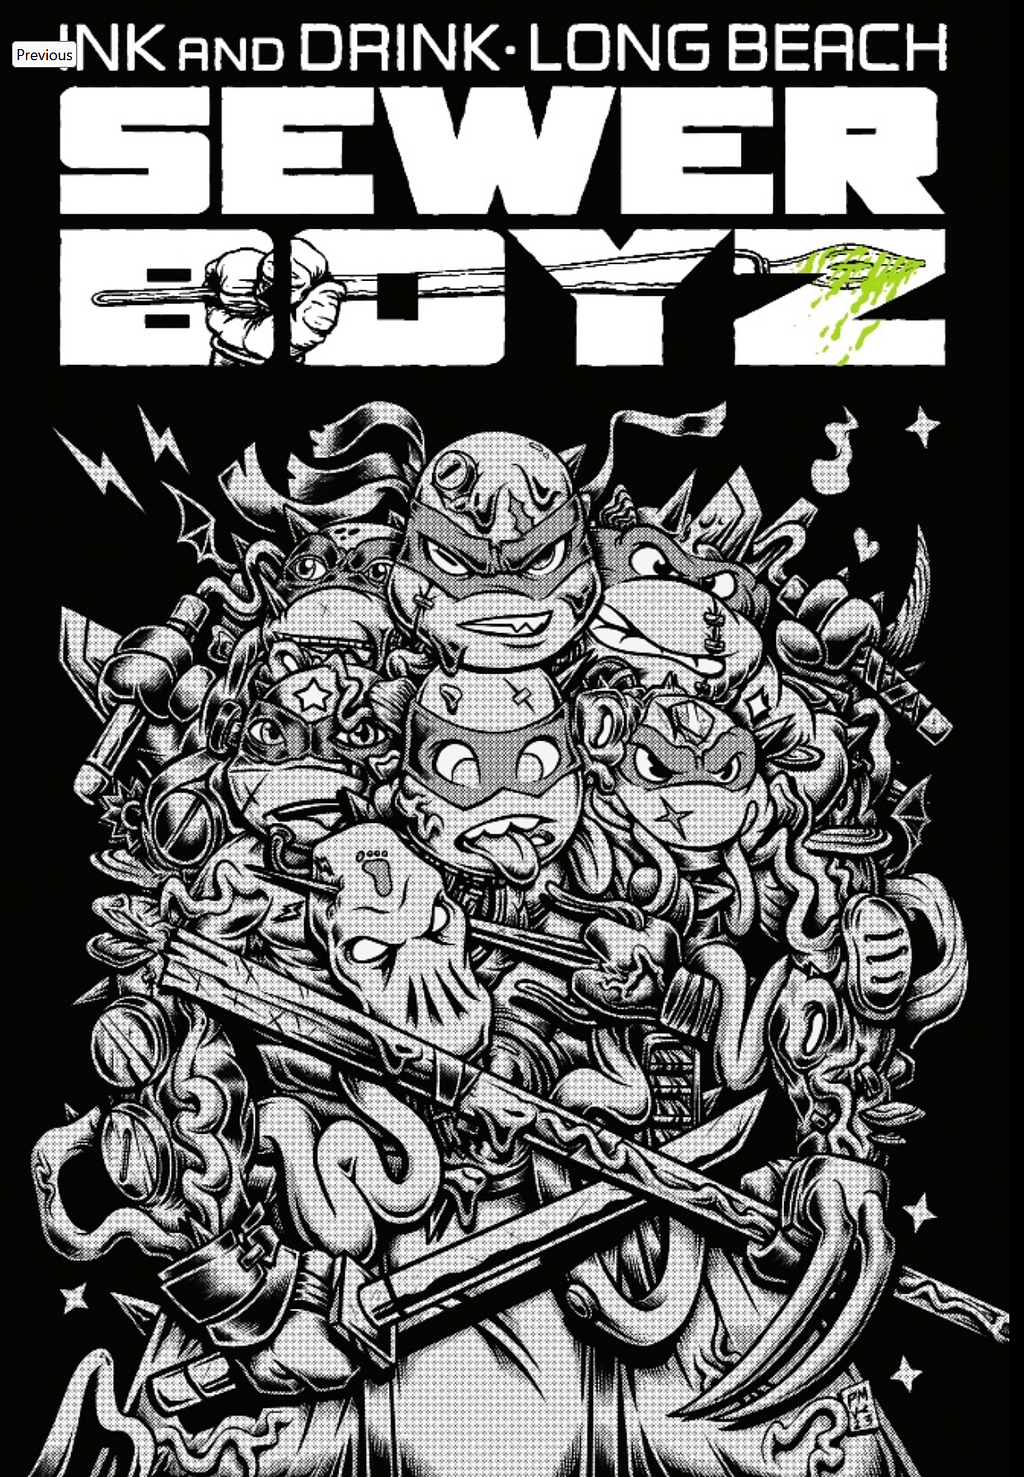 Cover of Sewer Boyz # 1